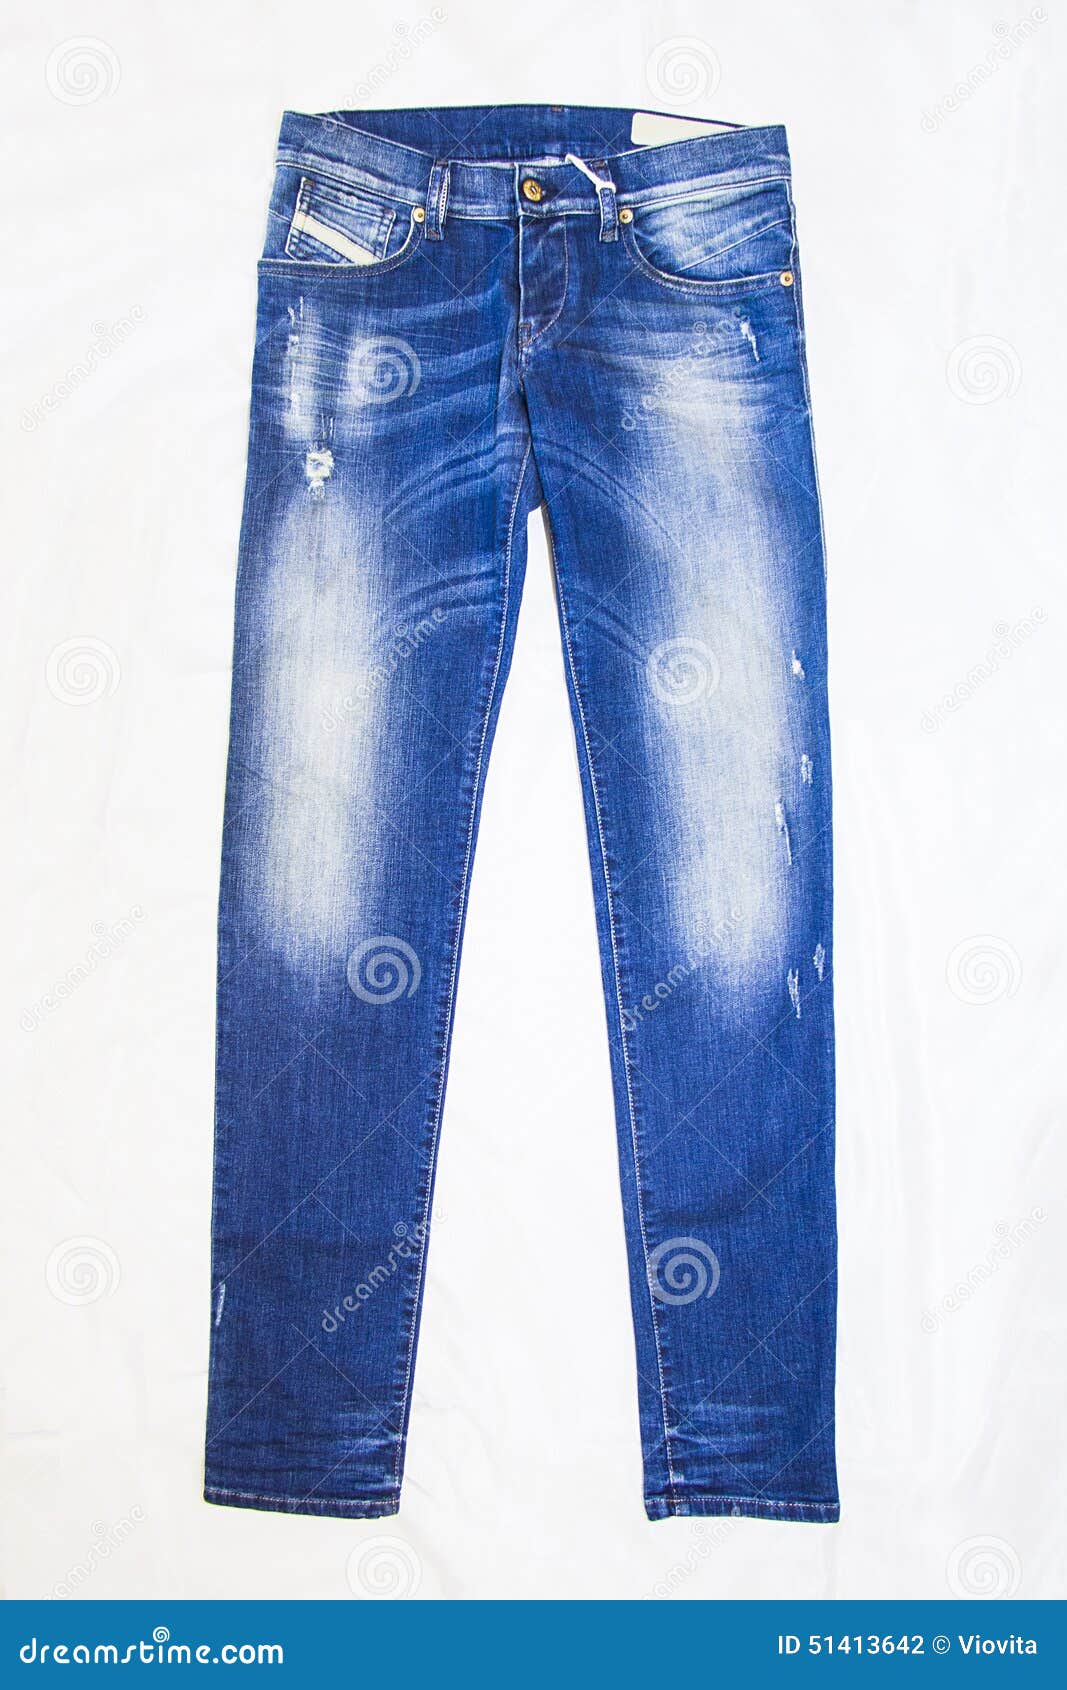 Men jeans stock photo. Image of wear, casual, trousers - 51413642